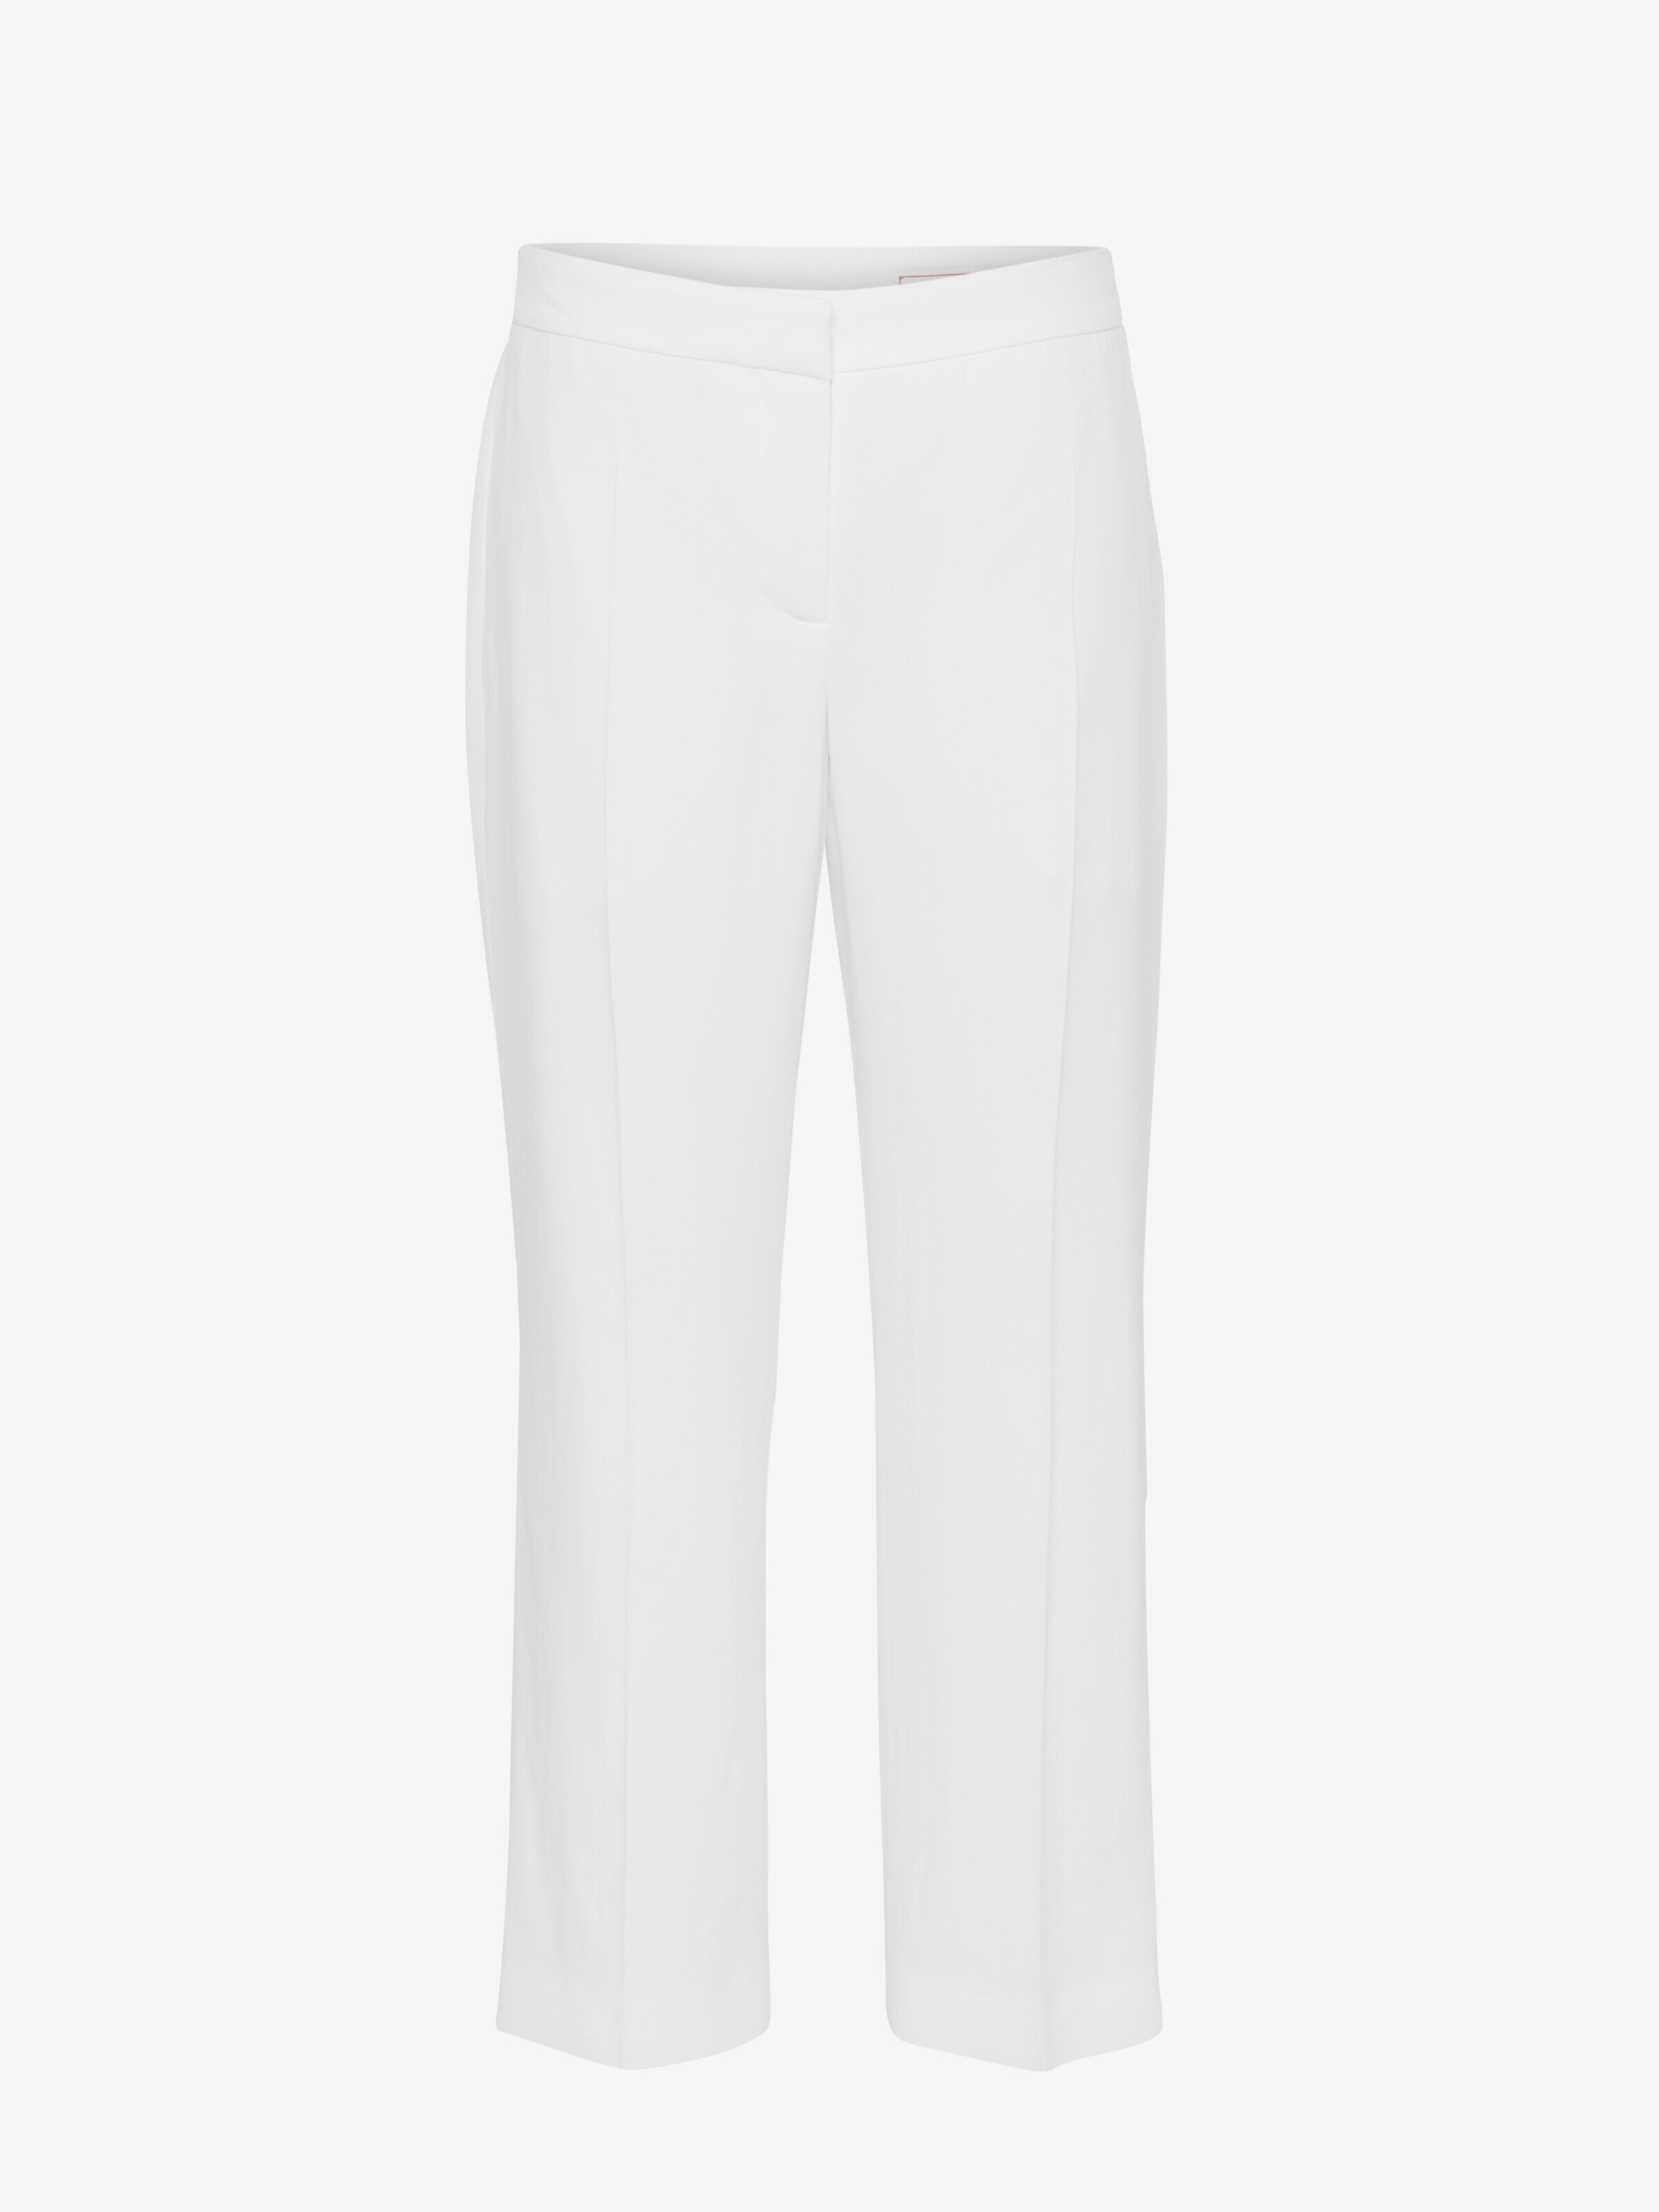 Alexander McQueen Clothing  Mens Ivory Wool Serge Cigarette Pants Ivory <  FreiRaum Hannover